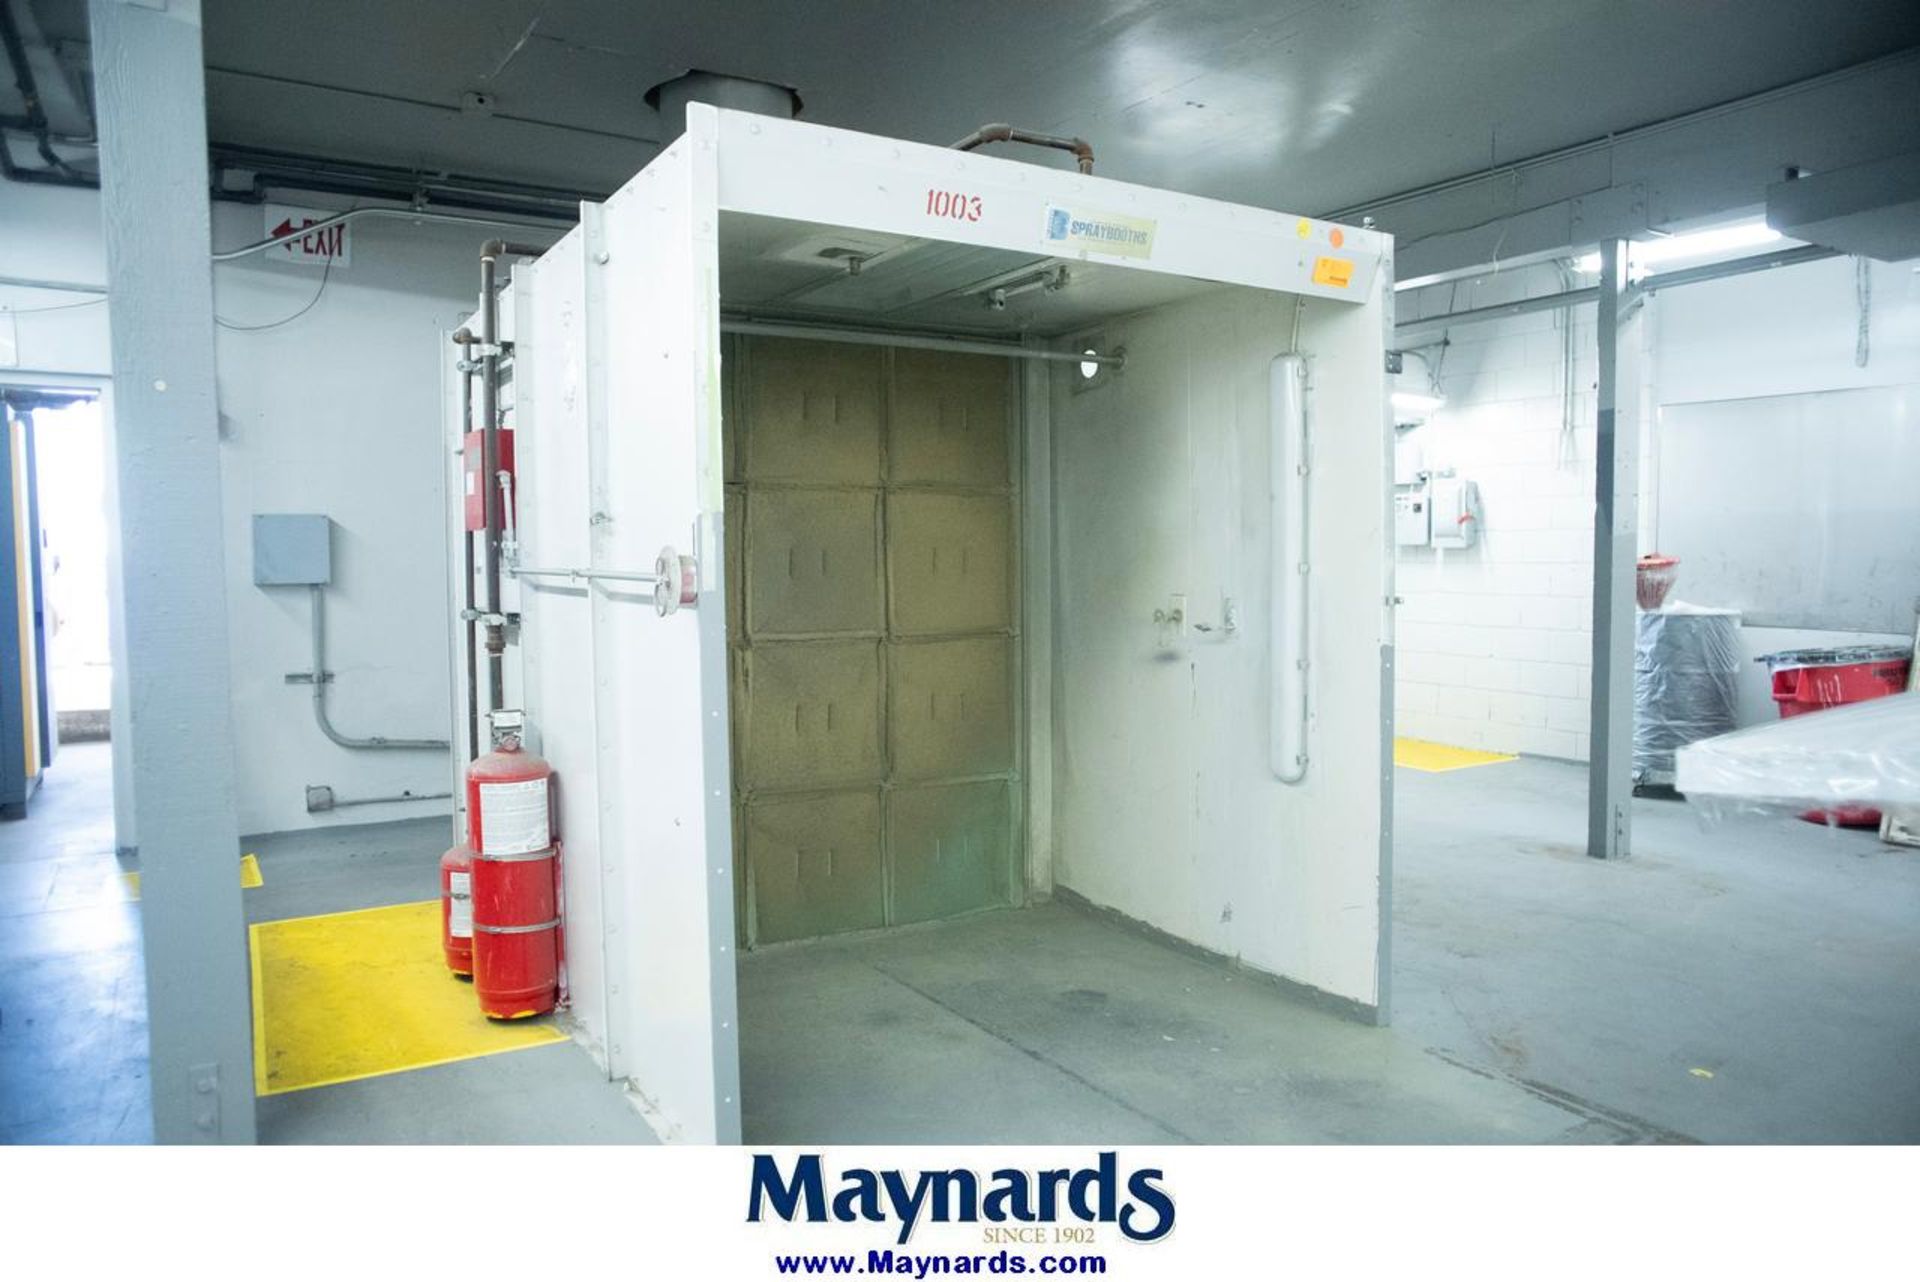 Bleeker Spray Booth (6'-4" W x 10'-4" L x 7'-2" H) - Image 2 of 20